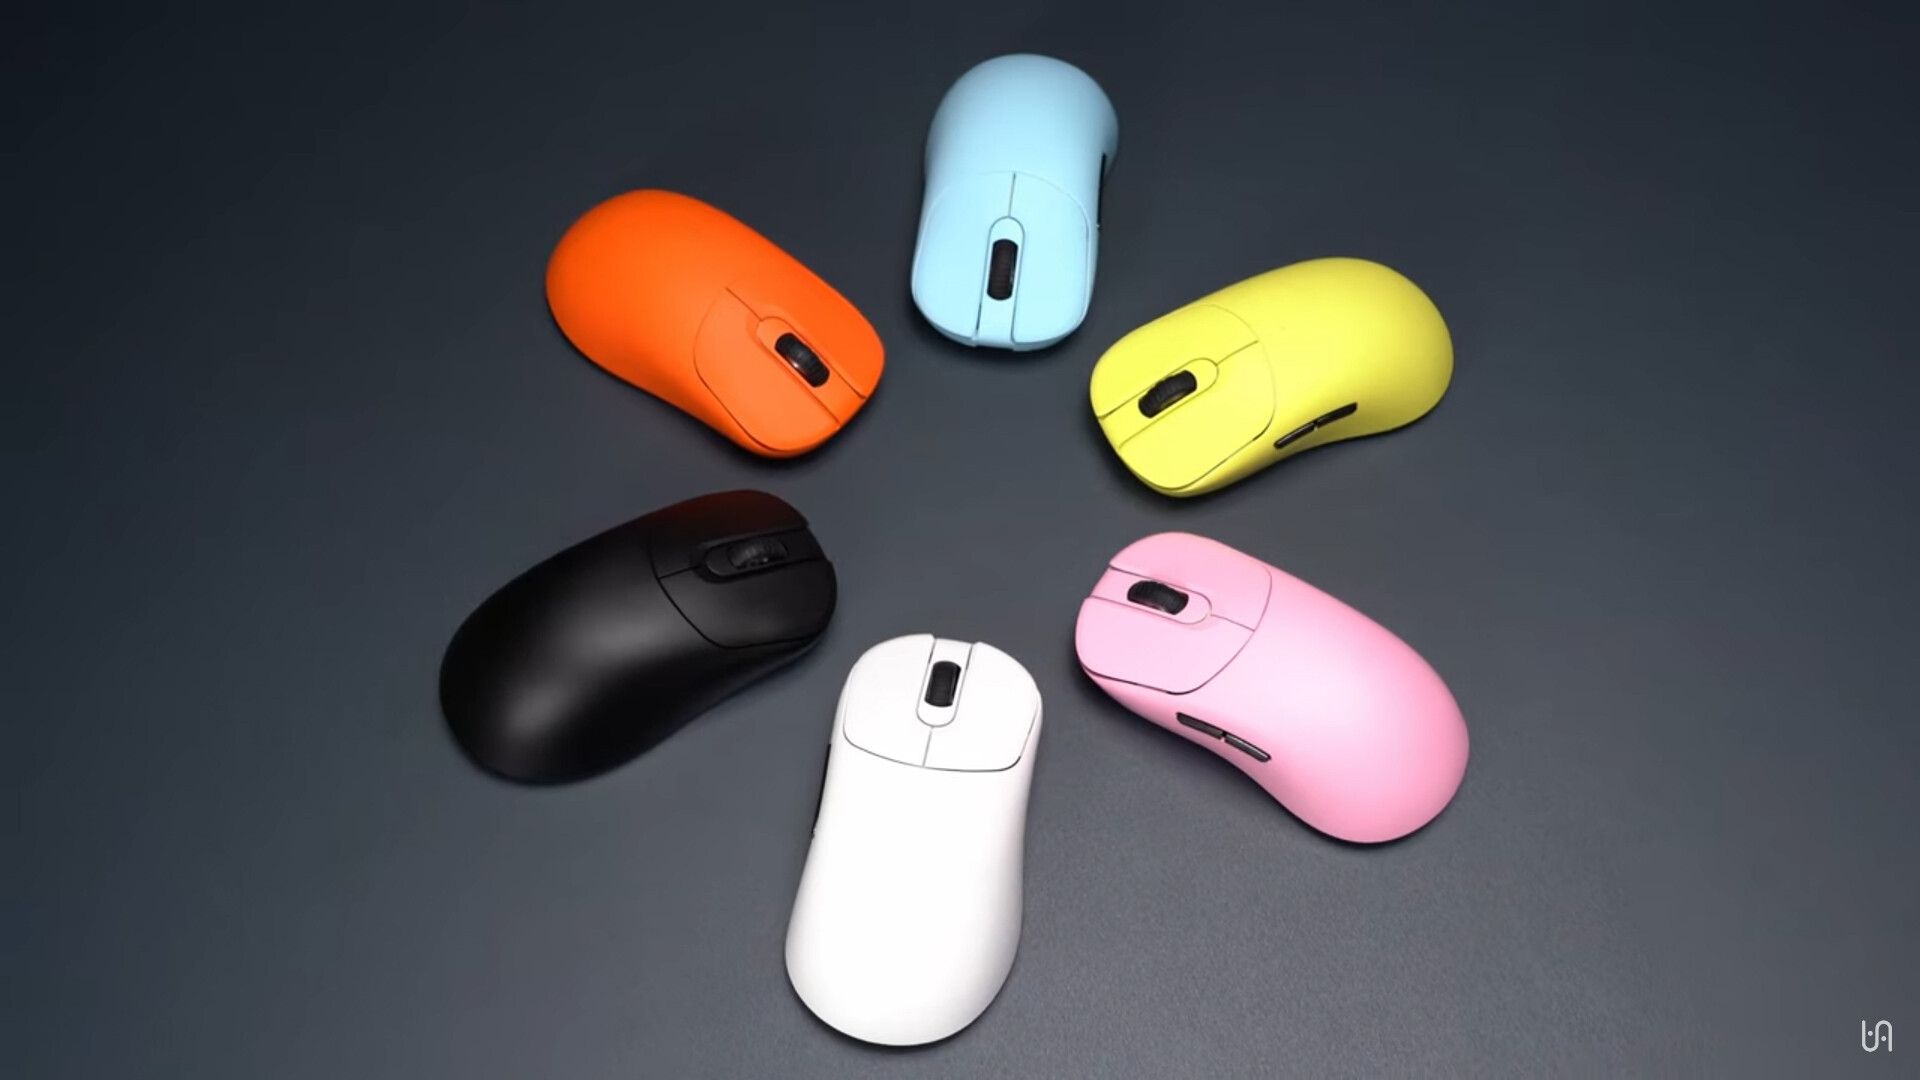 VAXEE Reveals The Colourful ZYGEN NP-01S Wireless Gaming Mouse